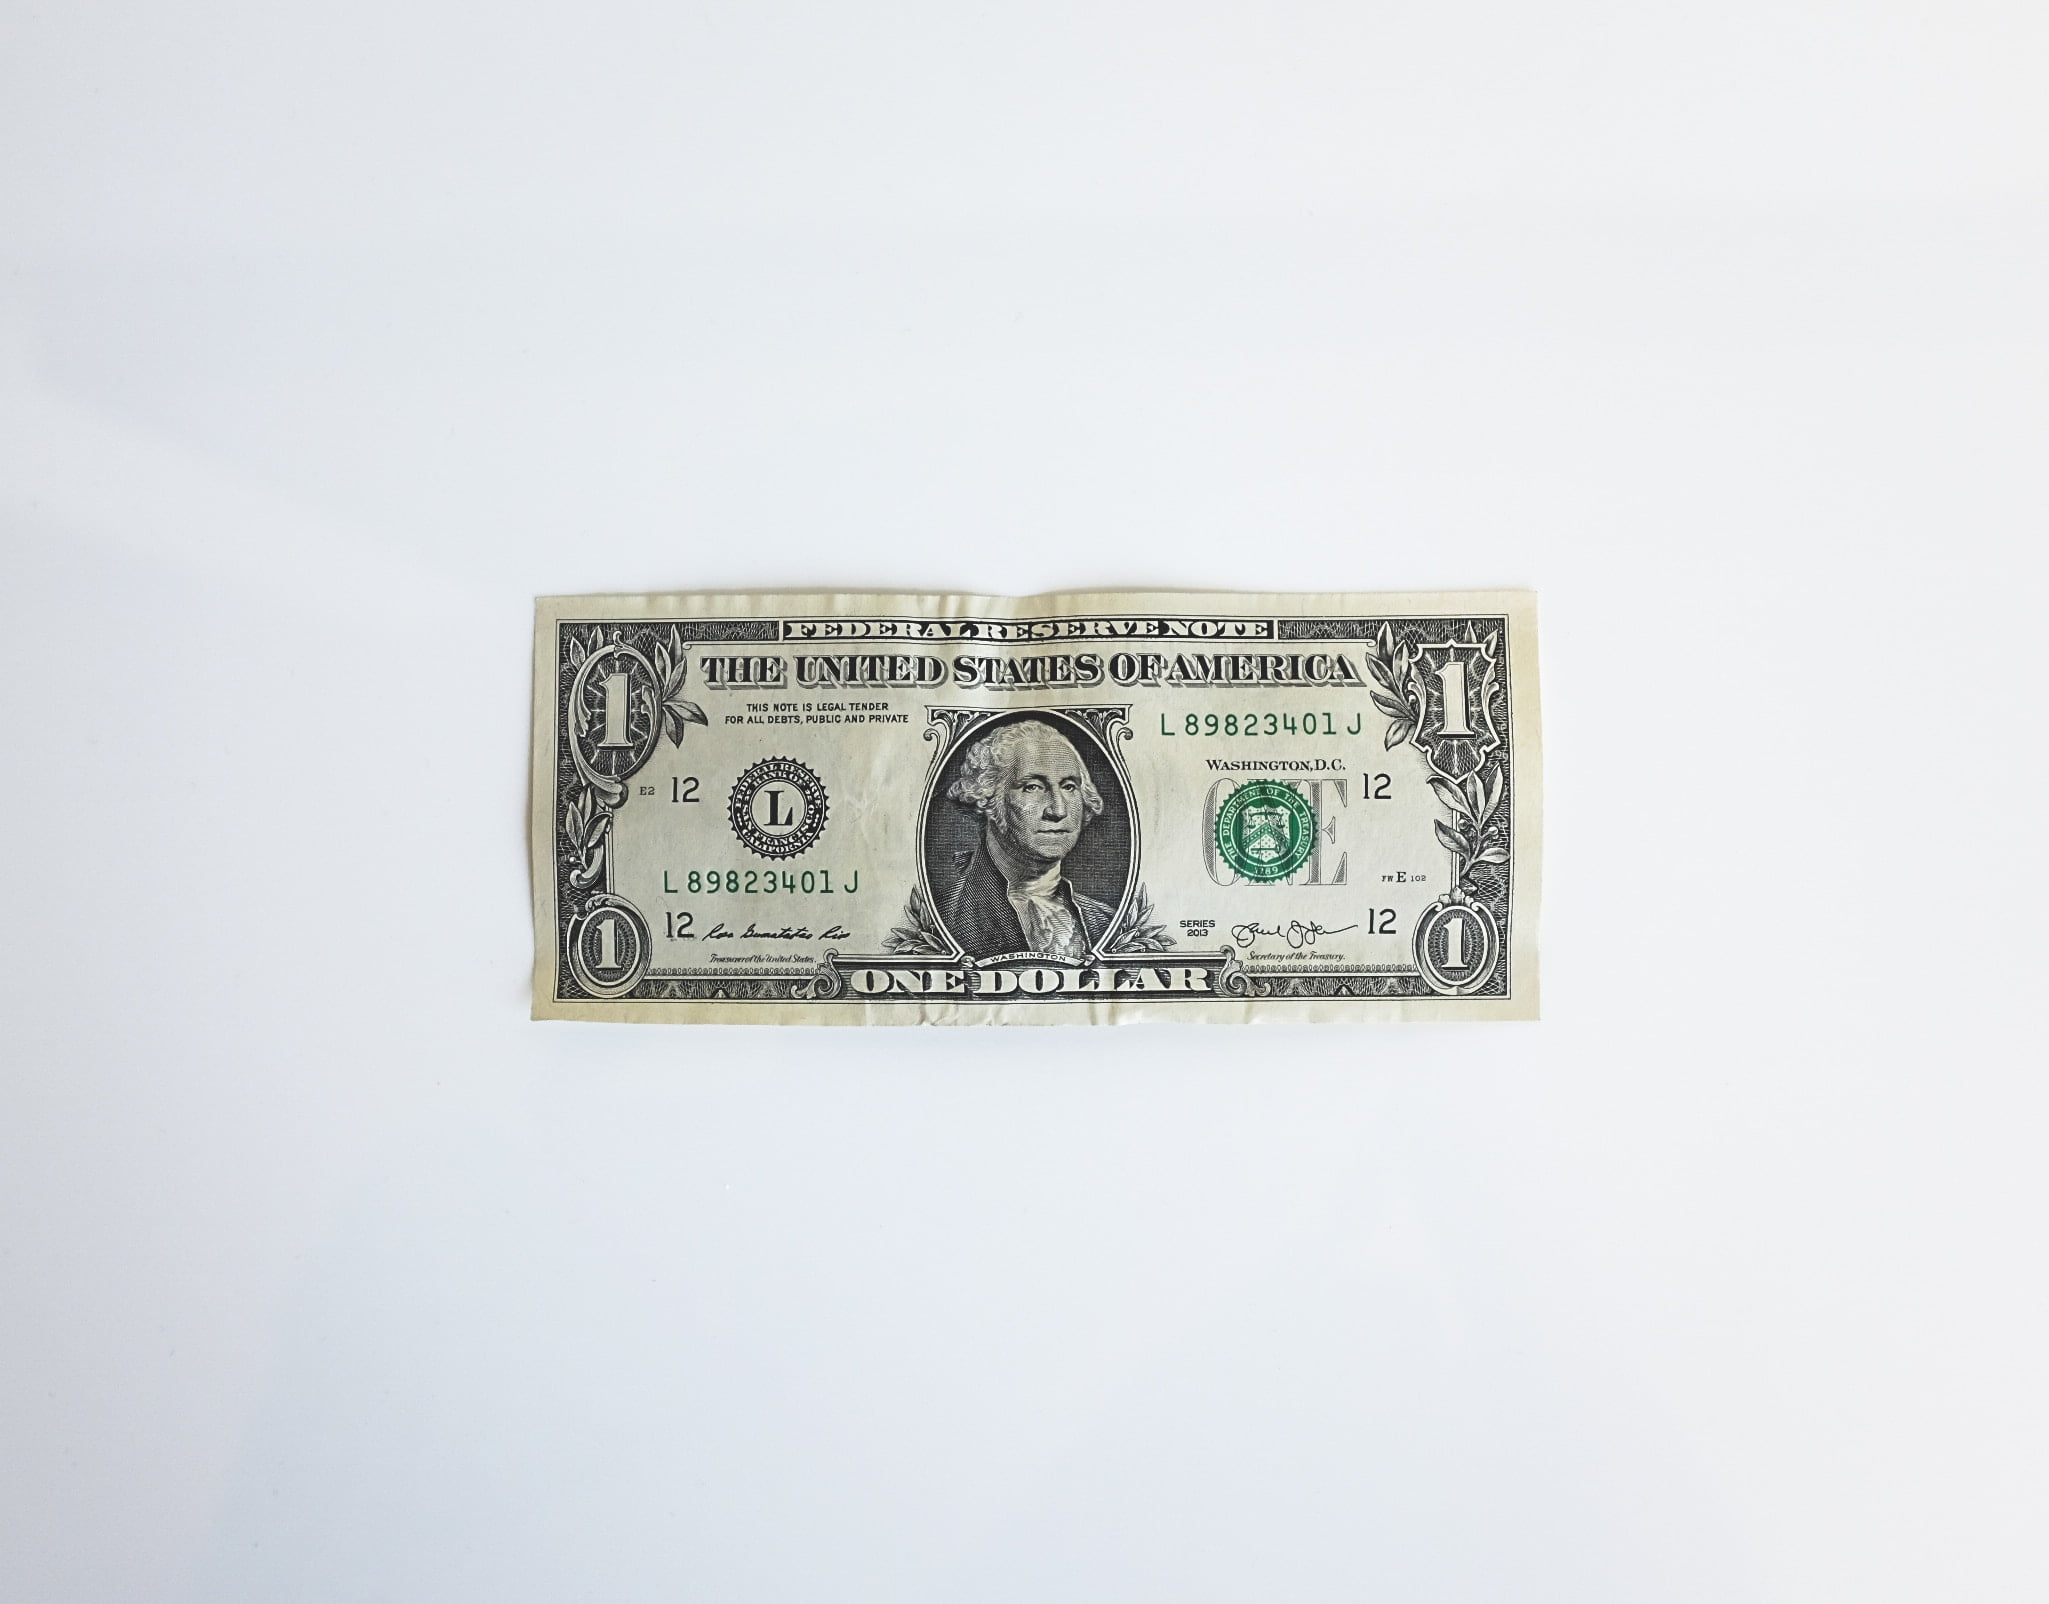 Prototype Of First U.S. Dollar Auctioned Off For $840k